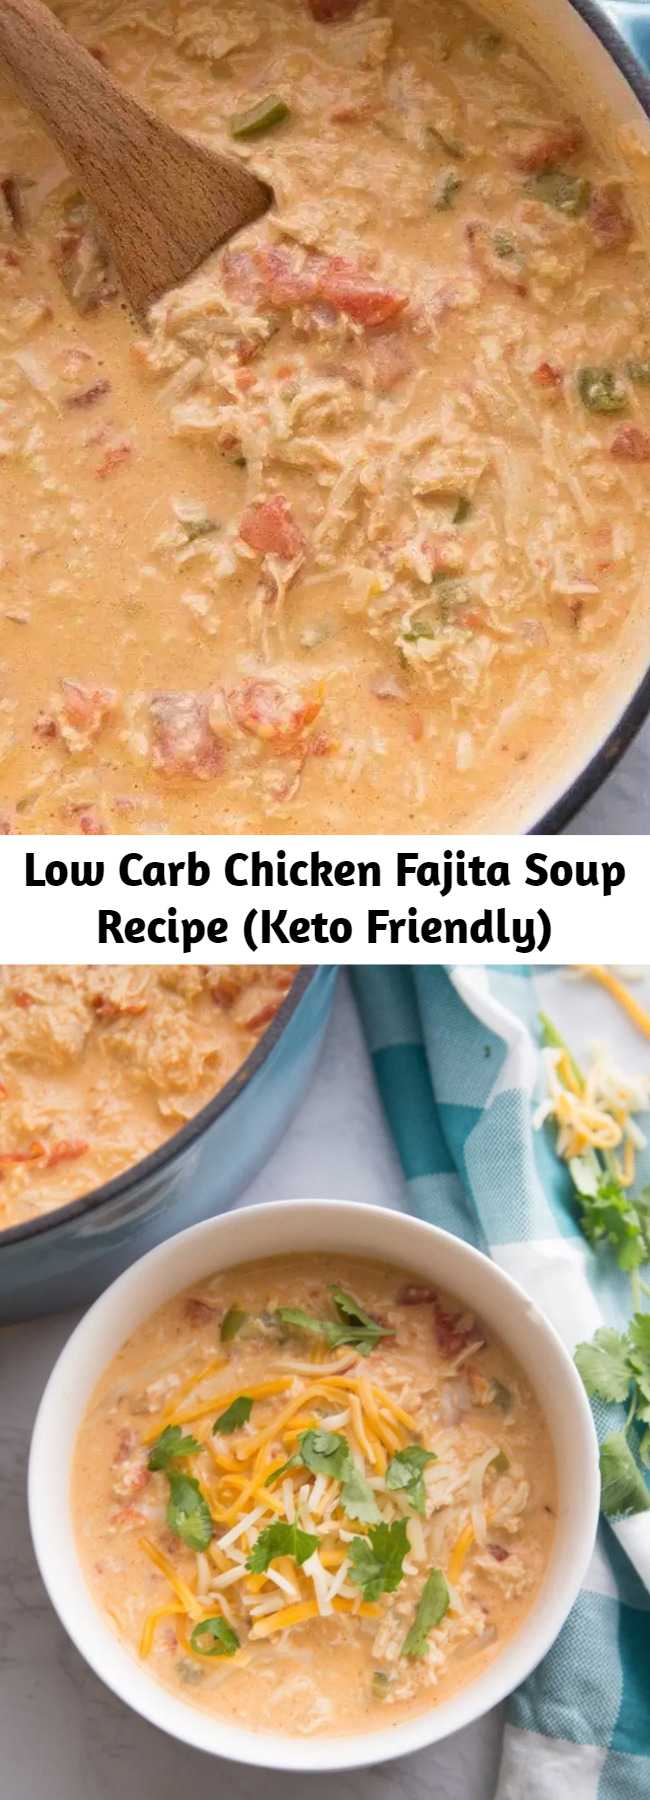 Low Carb Chicken Fajita Soup Recipe - If you love chicken fajitas but are following a keto or low carb diet, I’ve got the perfect alternative for you-this Low Carb Chicken Fajita Soup! It has all the same delicious Mexican flavors without all the carbs from the tortillas!